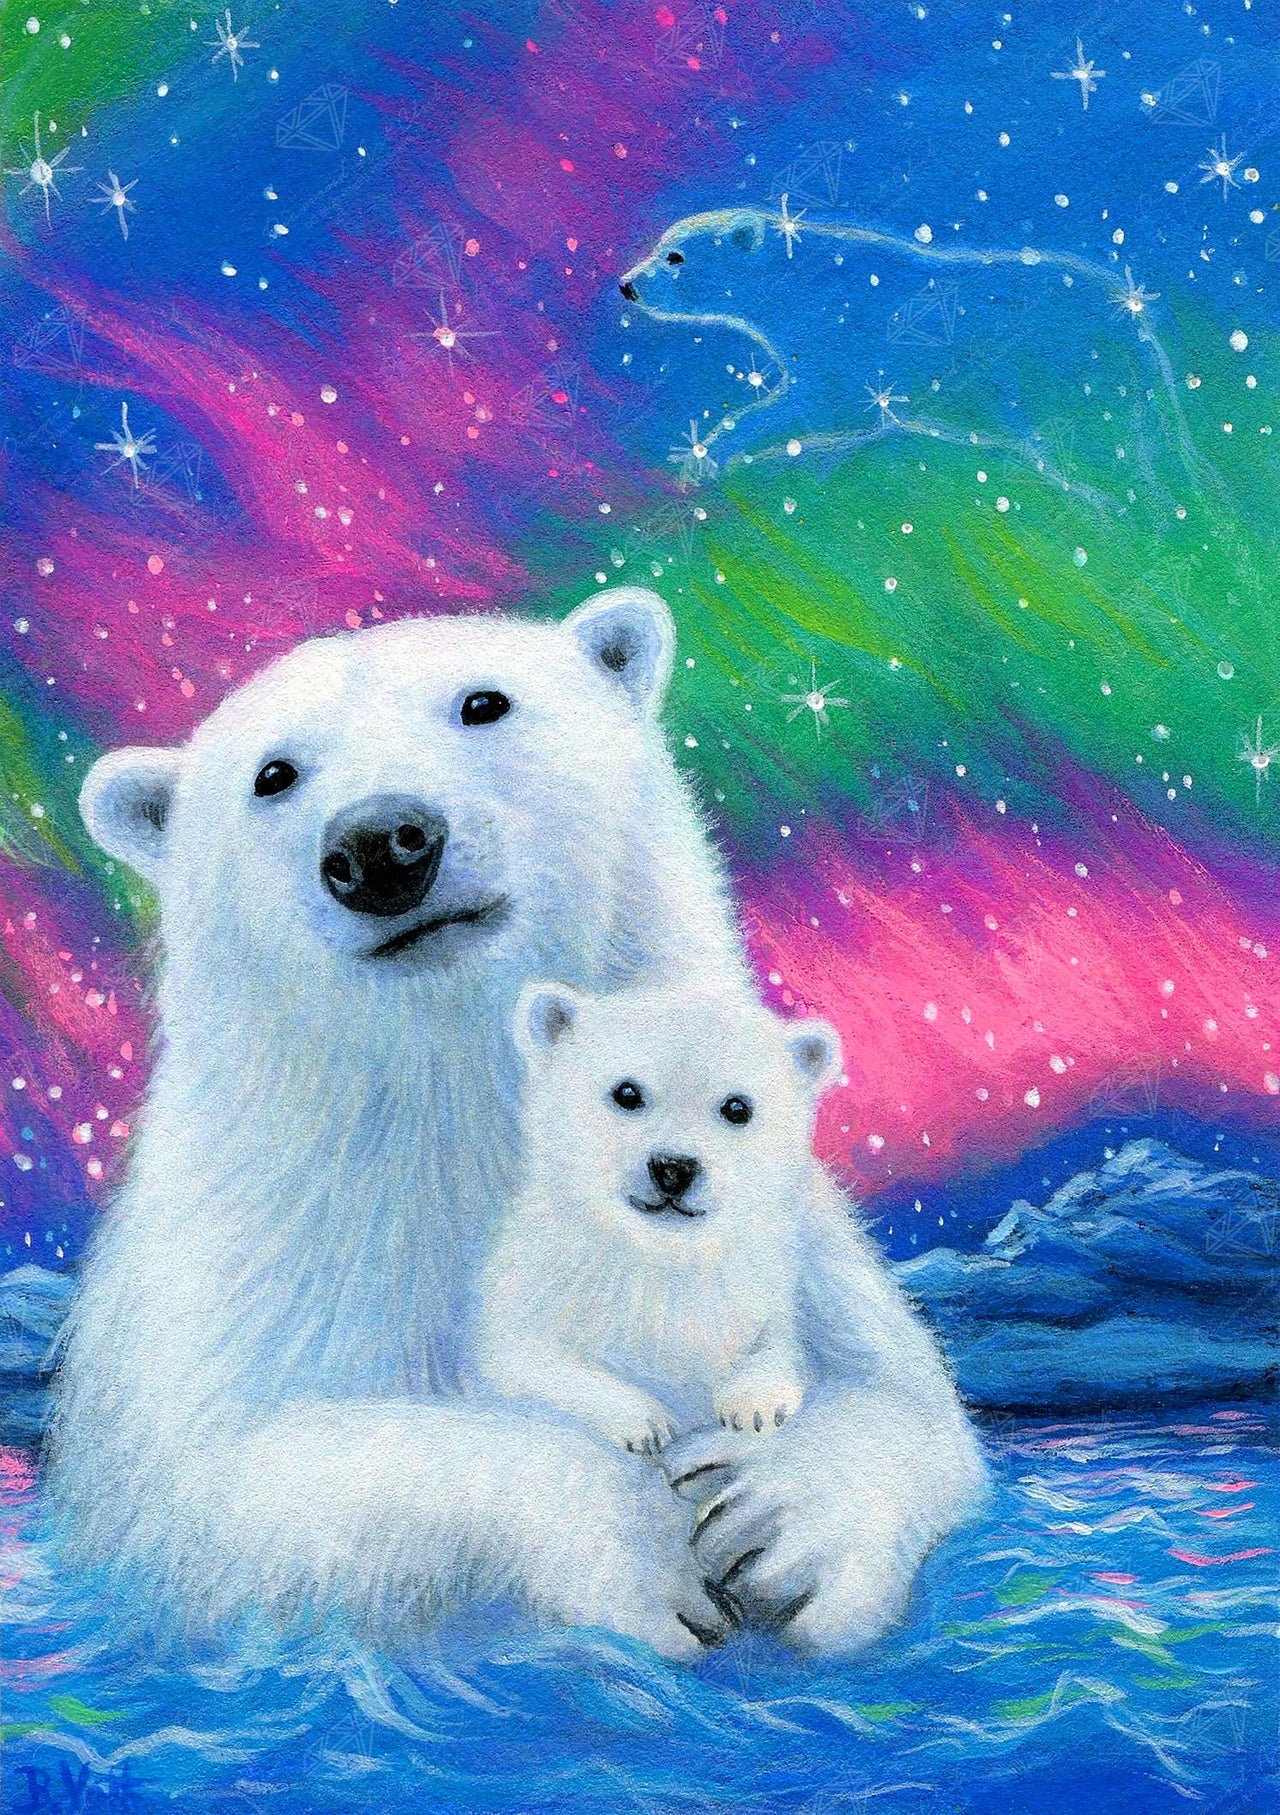 Diamond Painting Arctic Lights 17" x 24″ (43cm x 61cm) / Round with 41 Colors including 4 ABs / 33,200